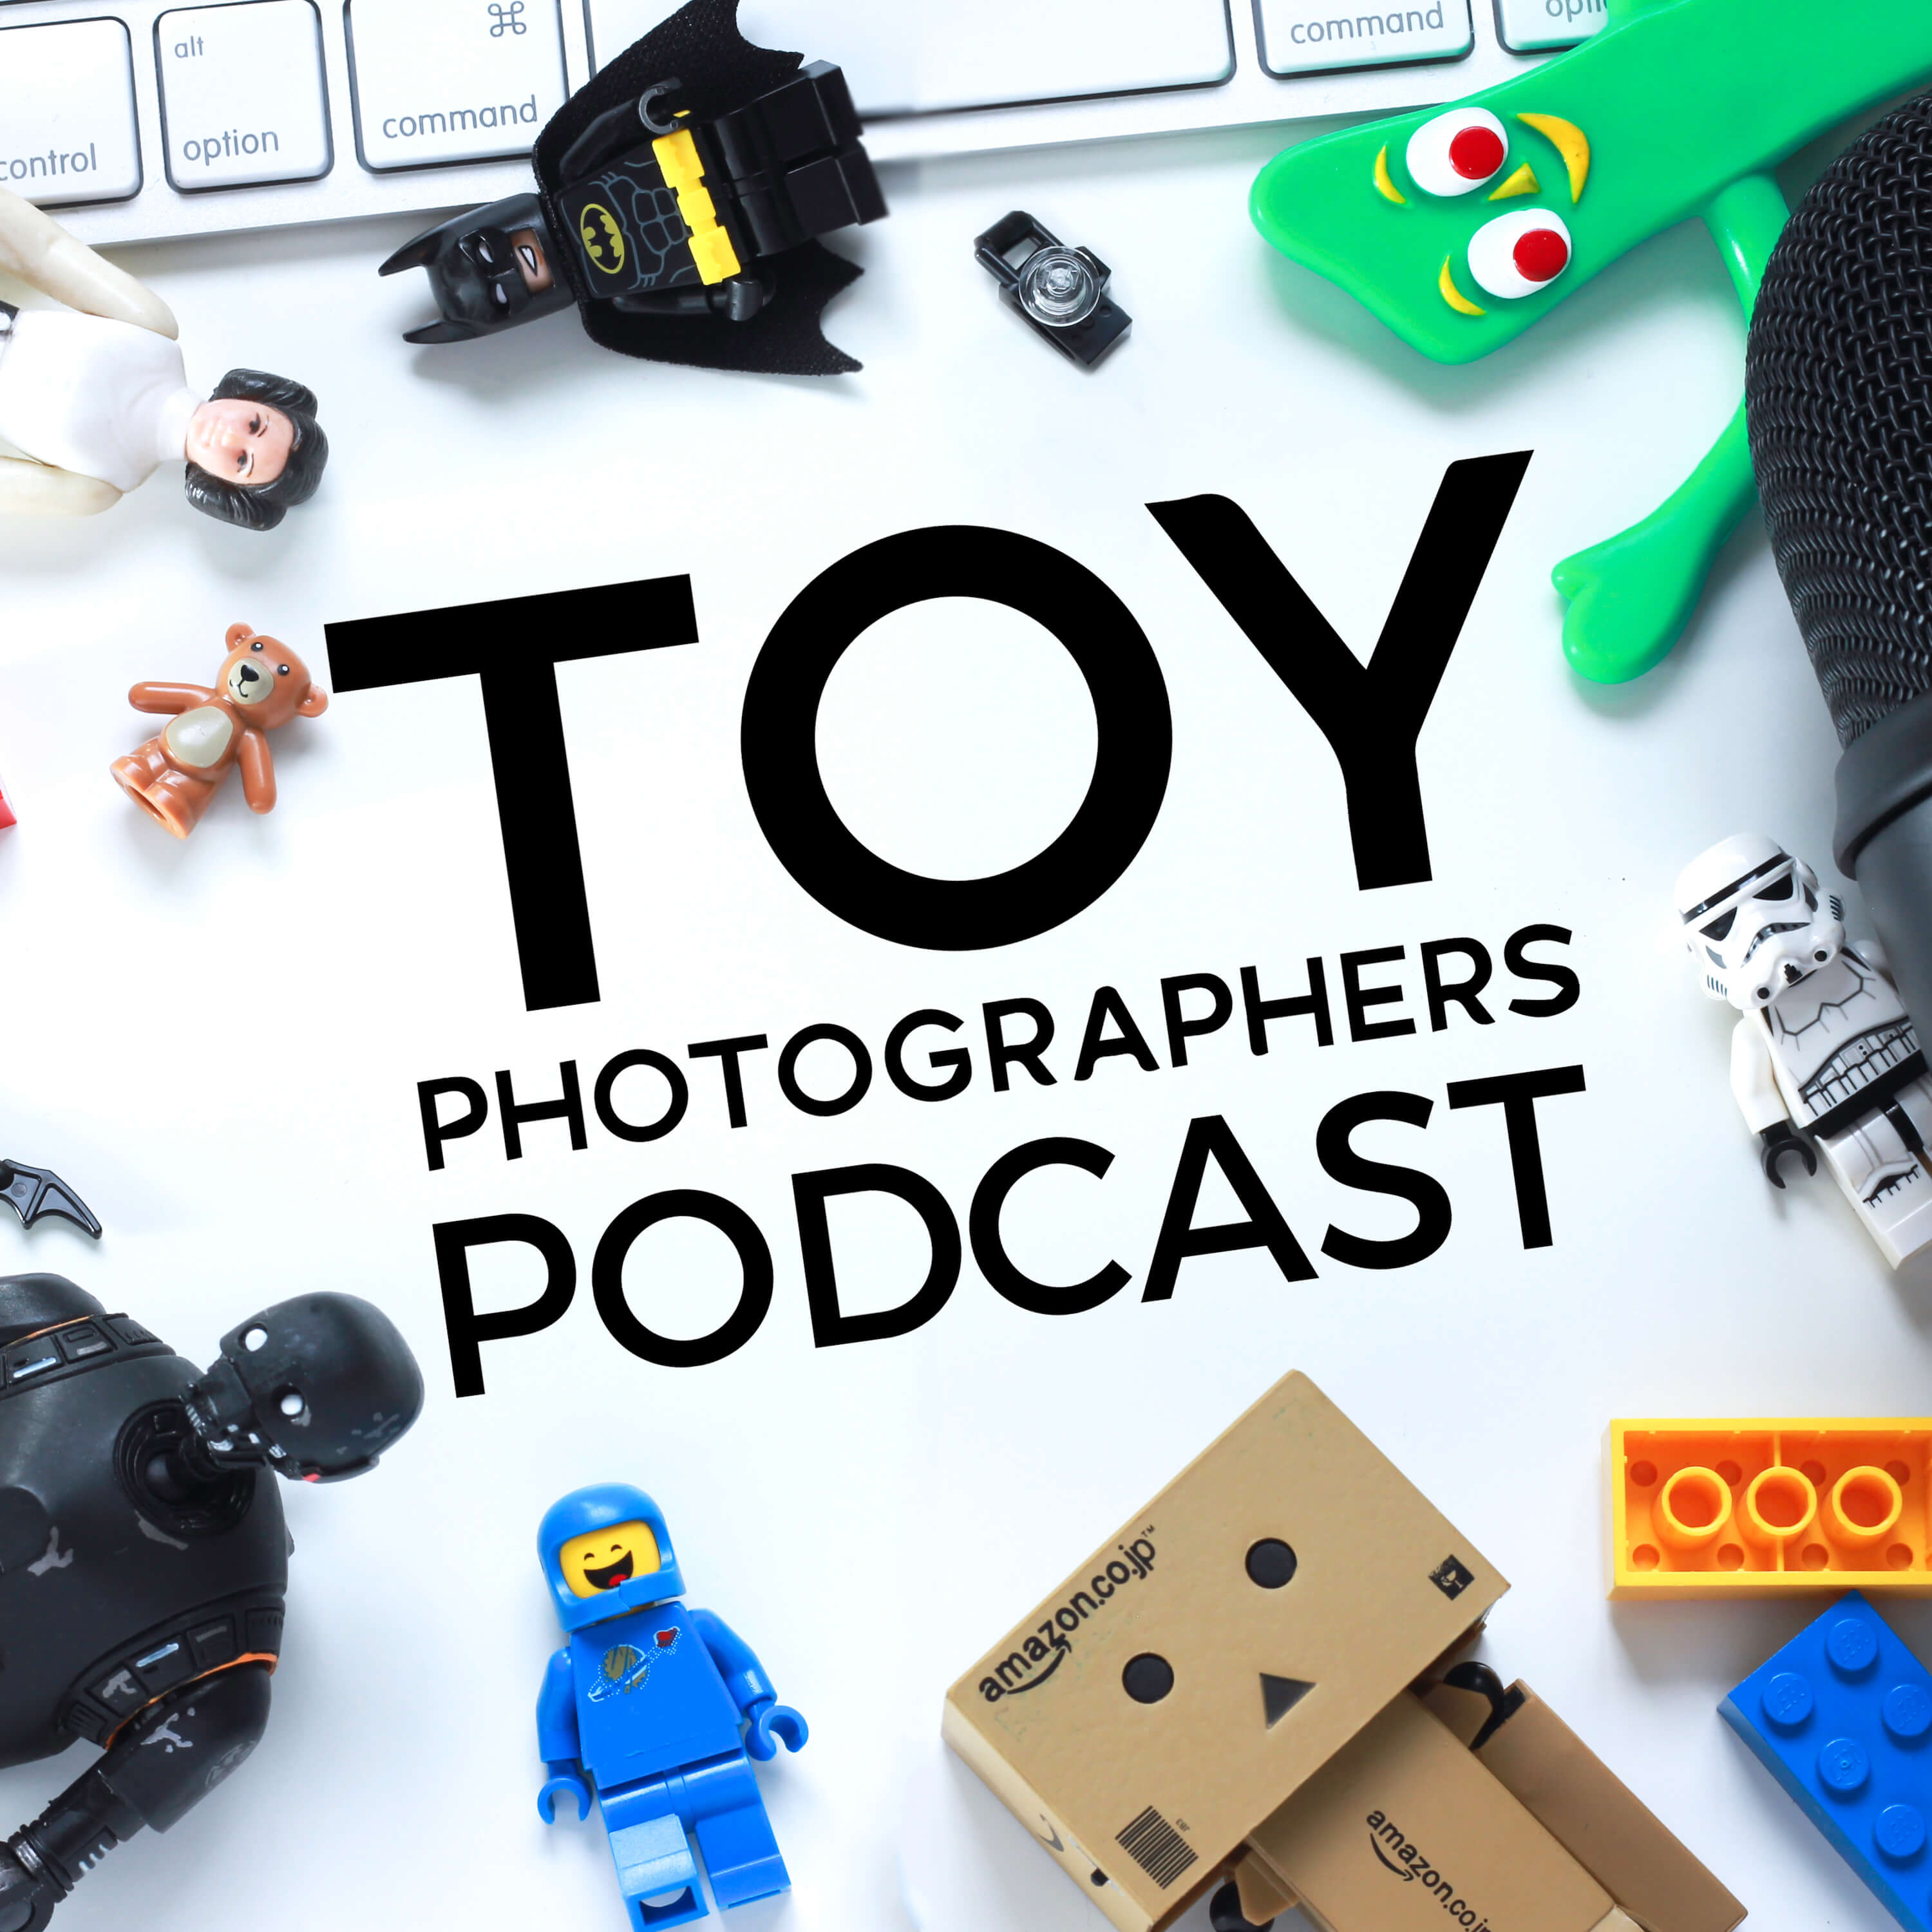 17 - REPLAY: The Toys That Made Us creator Brian Volk-Weiss